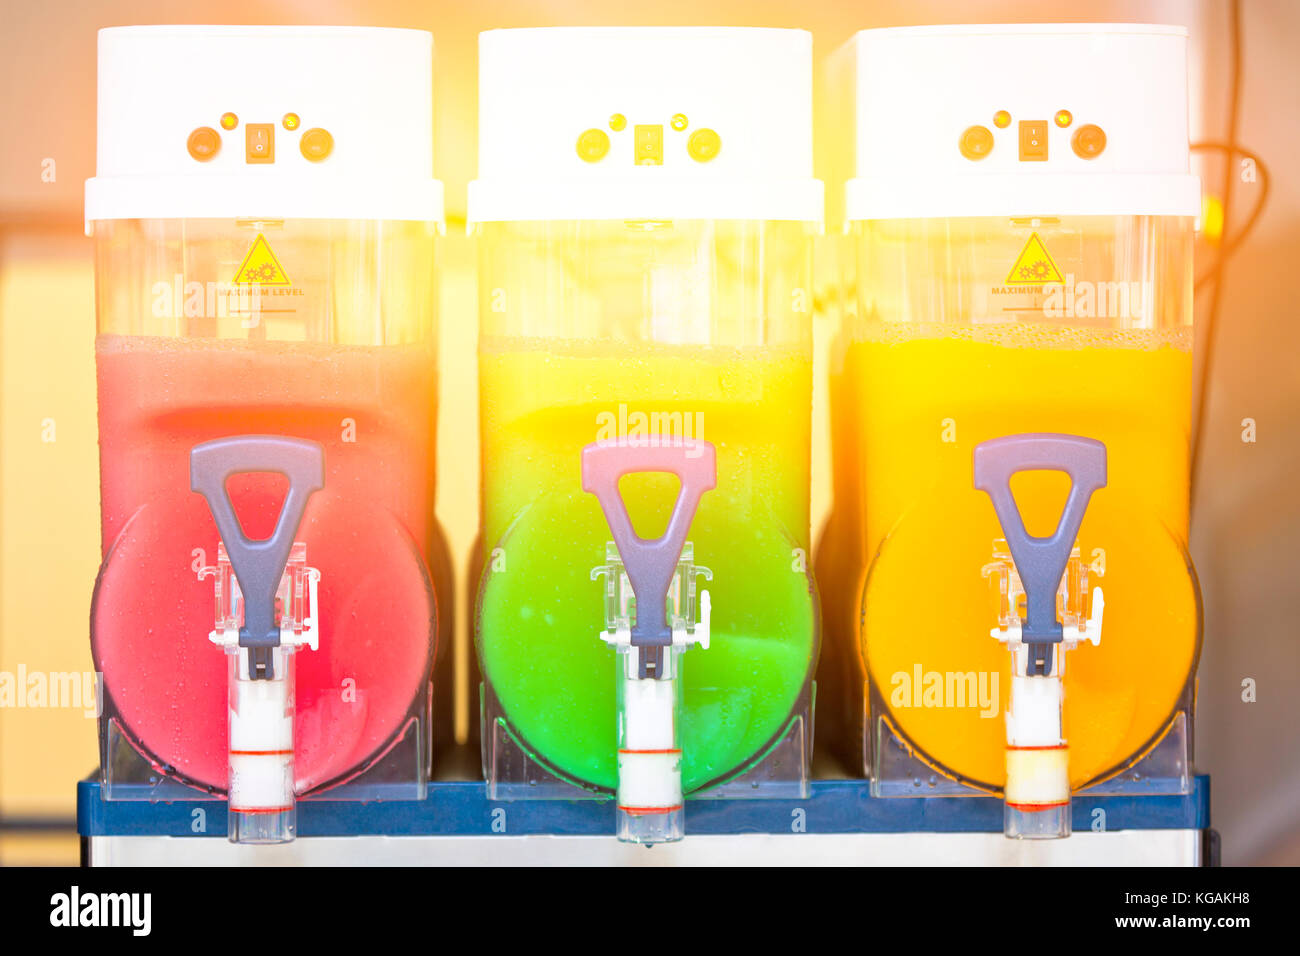 https://c8.alamy.com/comp/KGAKH8/crushed-fruit-ice-drink-dispensers-with-color-refreshments-KGAKH8.jpg